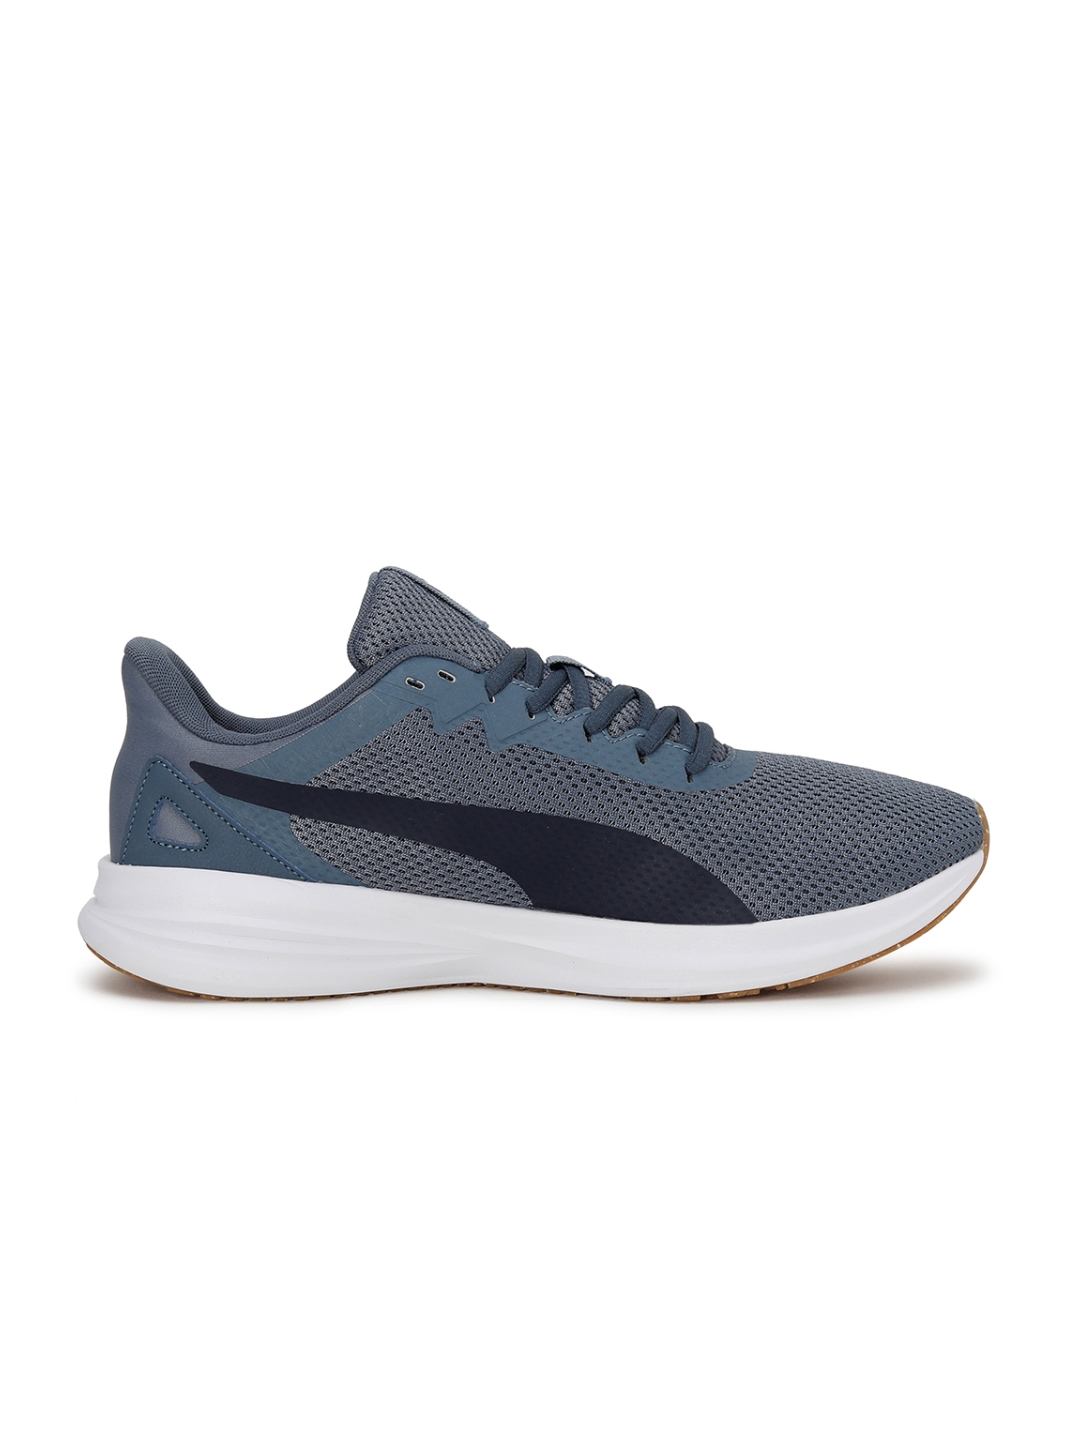 SKECHERS Casual Shoes  Buy SKECHERS Boys Skech Fast Blue Casual Shoes  Online  Nykaa Fashion